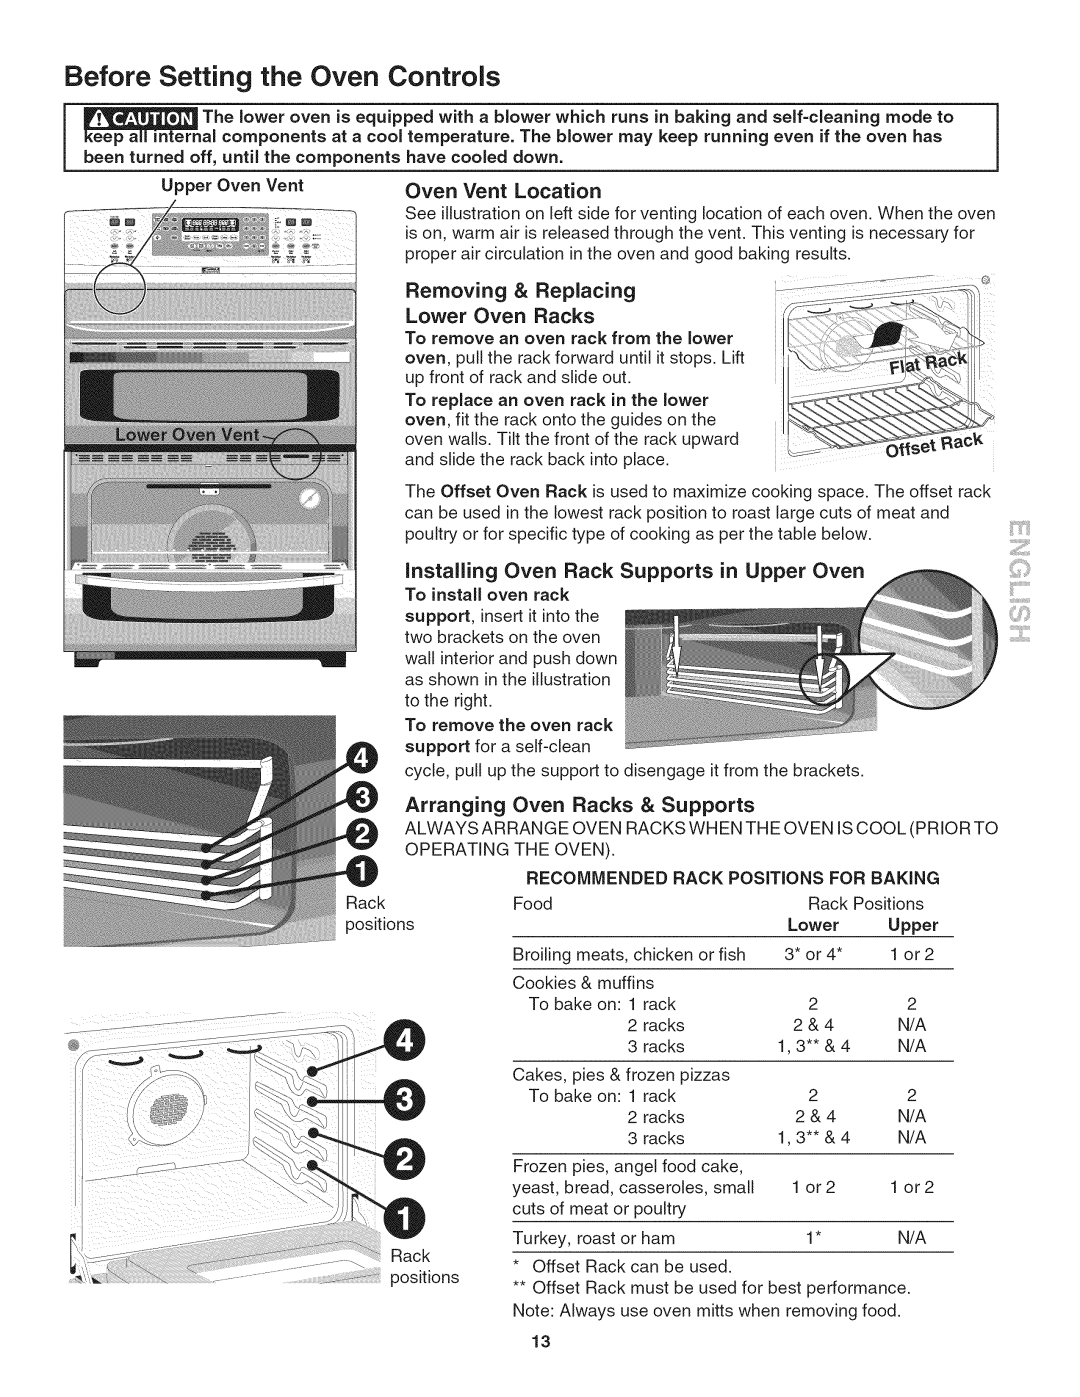 Kenmore 790. 9802 Before Setting the Oven Controls, Vent, Location, Removing, Replacing, Lower Oven, Racks, Arranging 